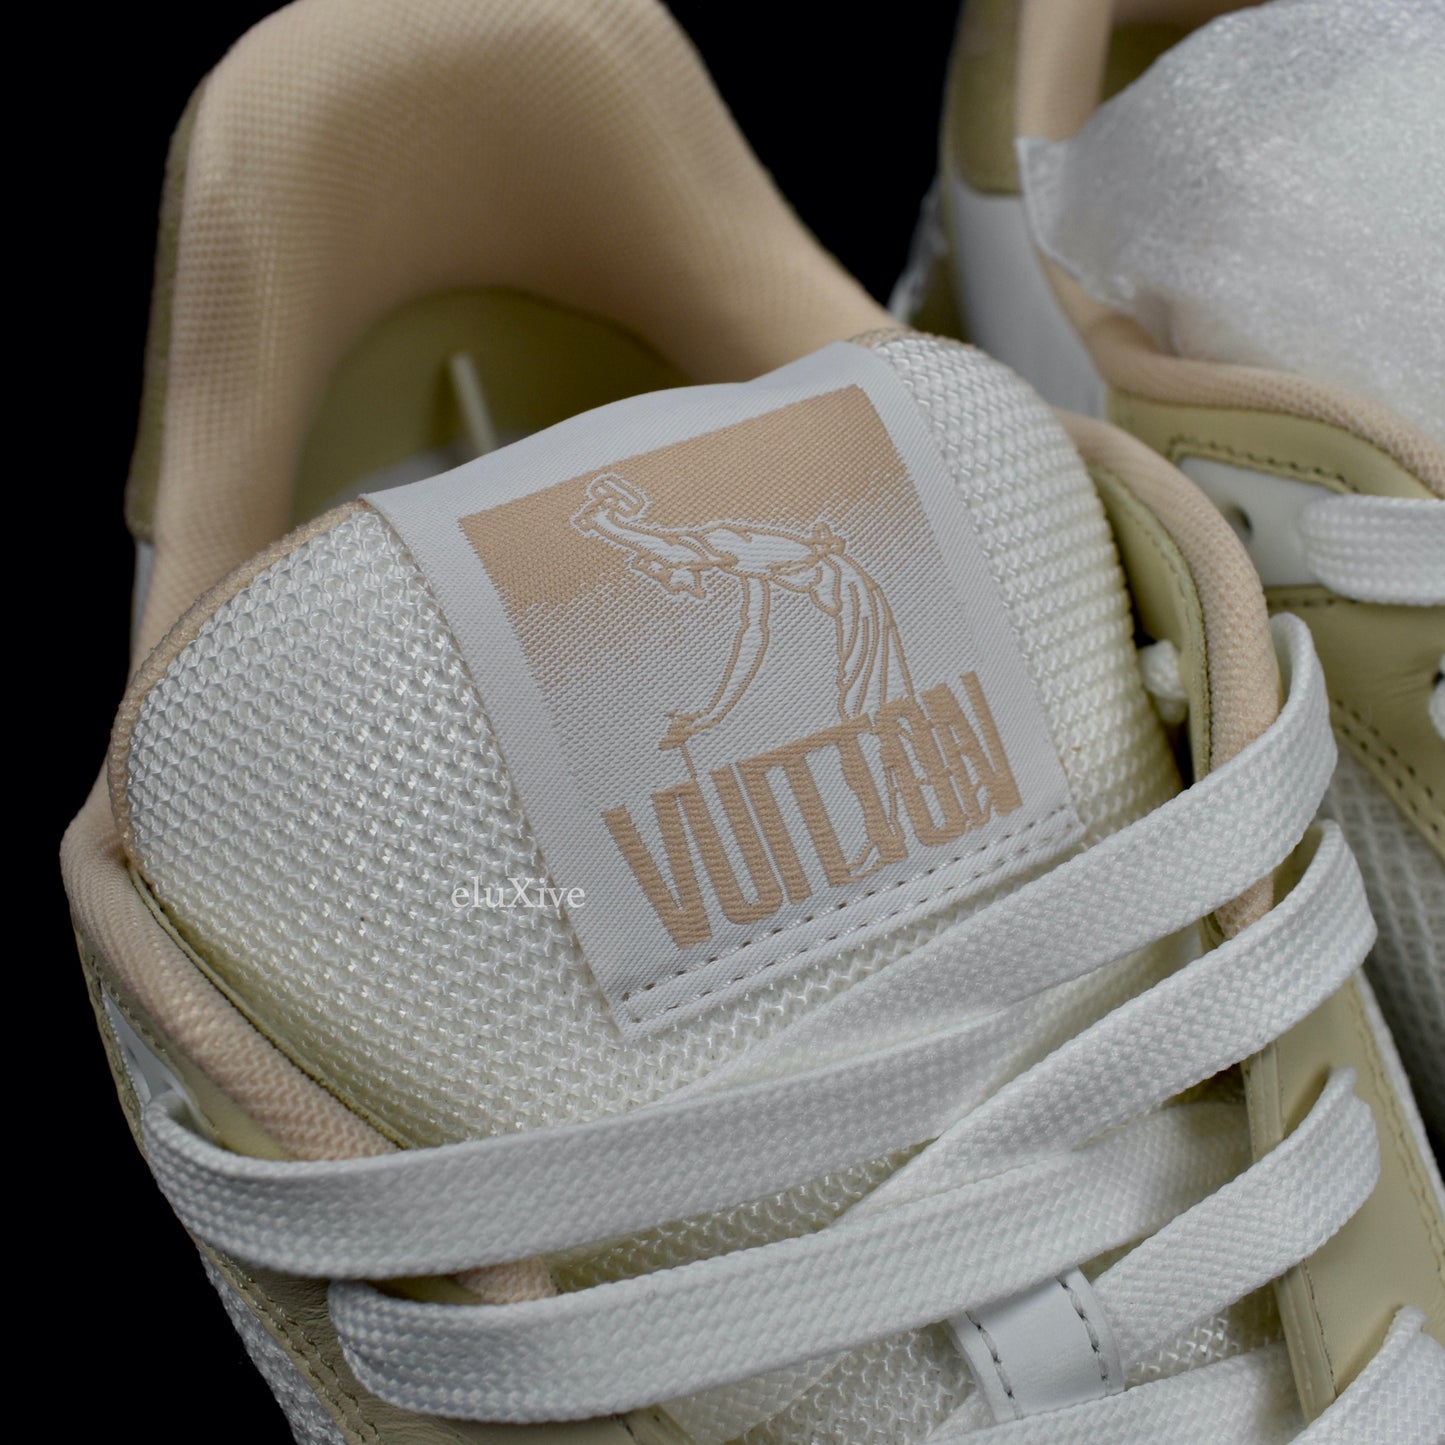 Louis Vuitton - White/Beige Trainer Sneakers with Strap